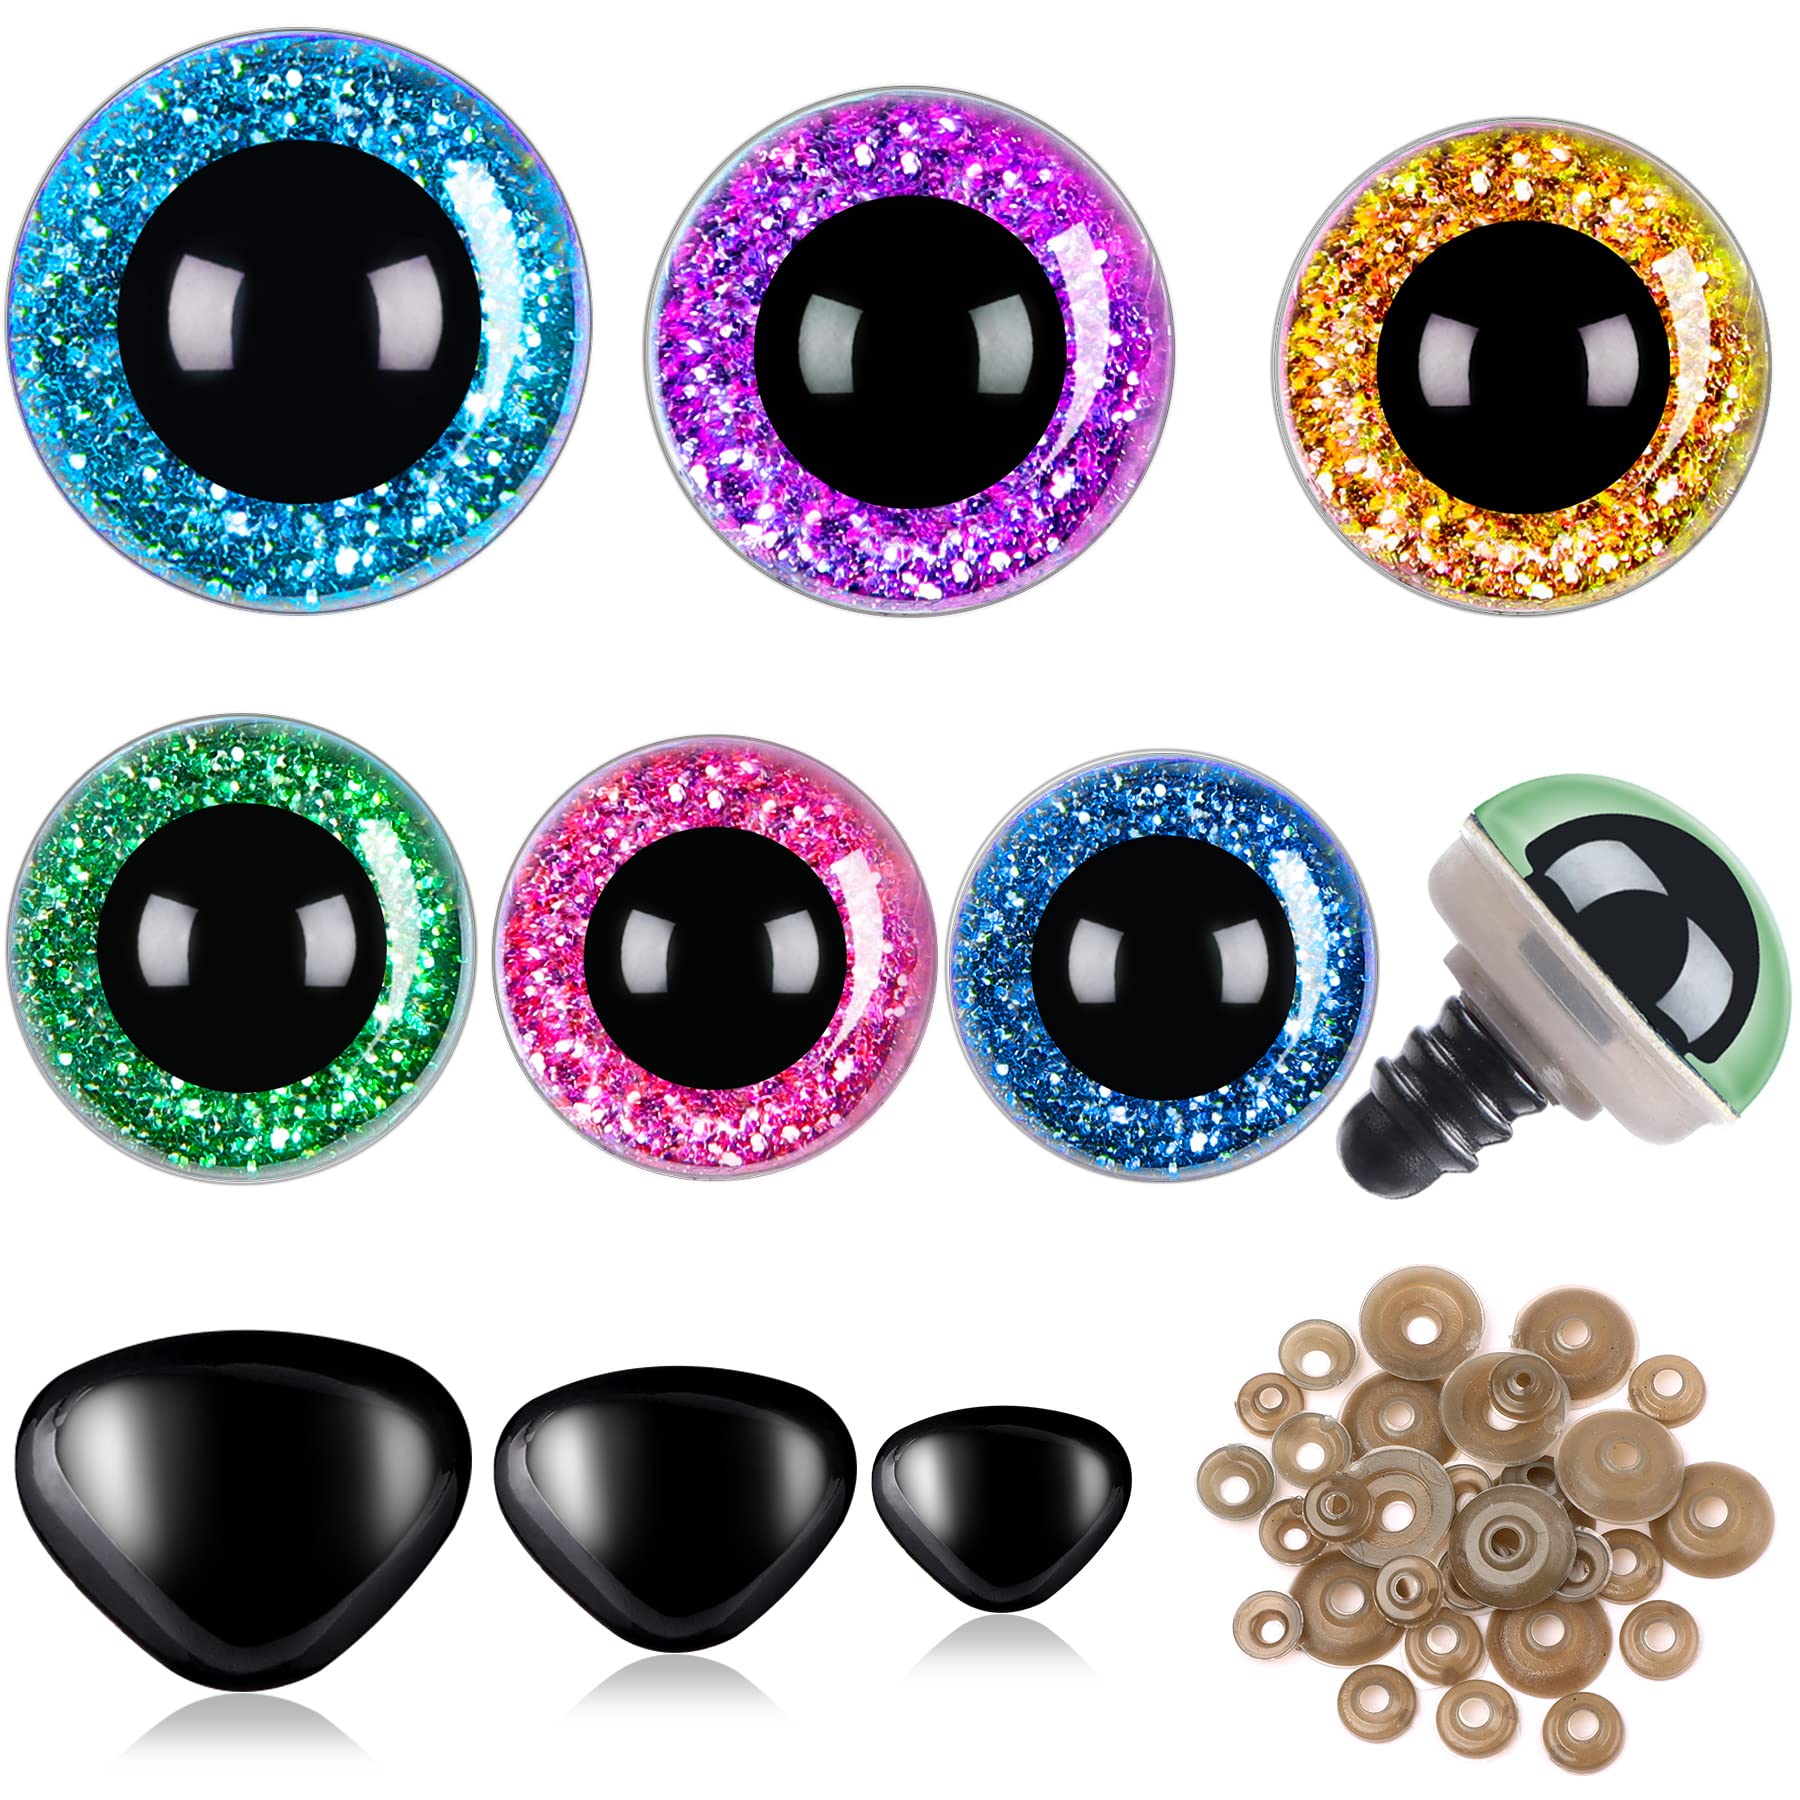 UPINS 180Pcs Safety Eyes and Noses for Amigurumi Large Plastic Craft  Crochet Eyes for Stuffed Animals DIY Puppet Bear Toy Doll Making Supplies  12-30mm Shiny